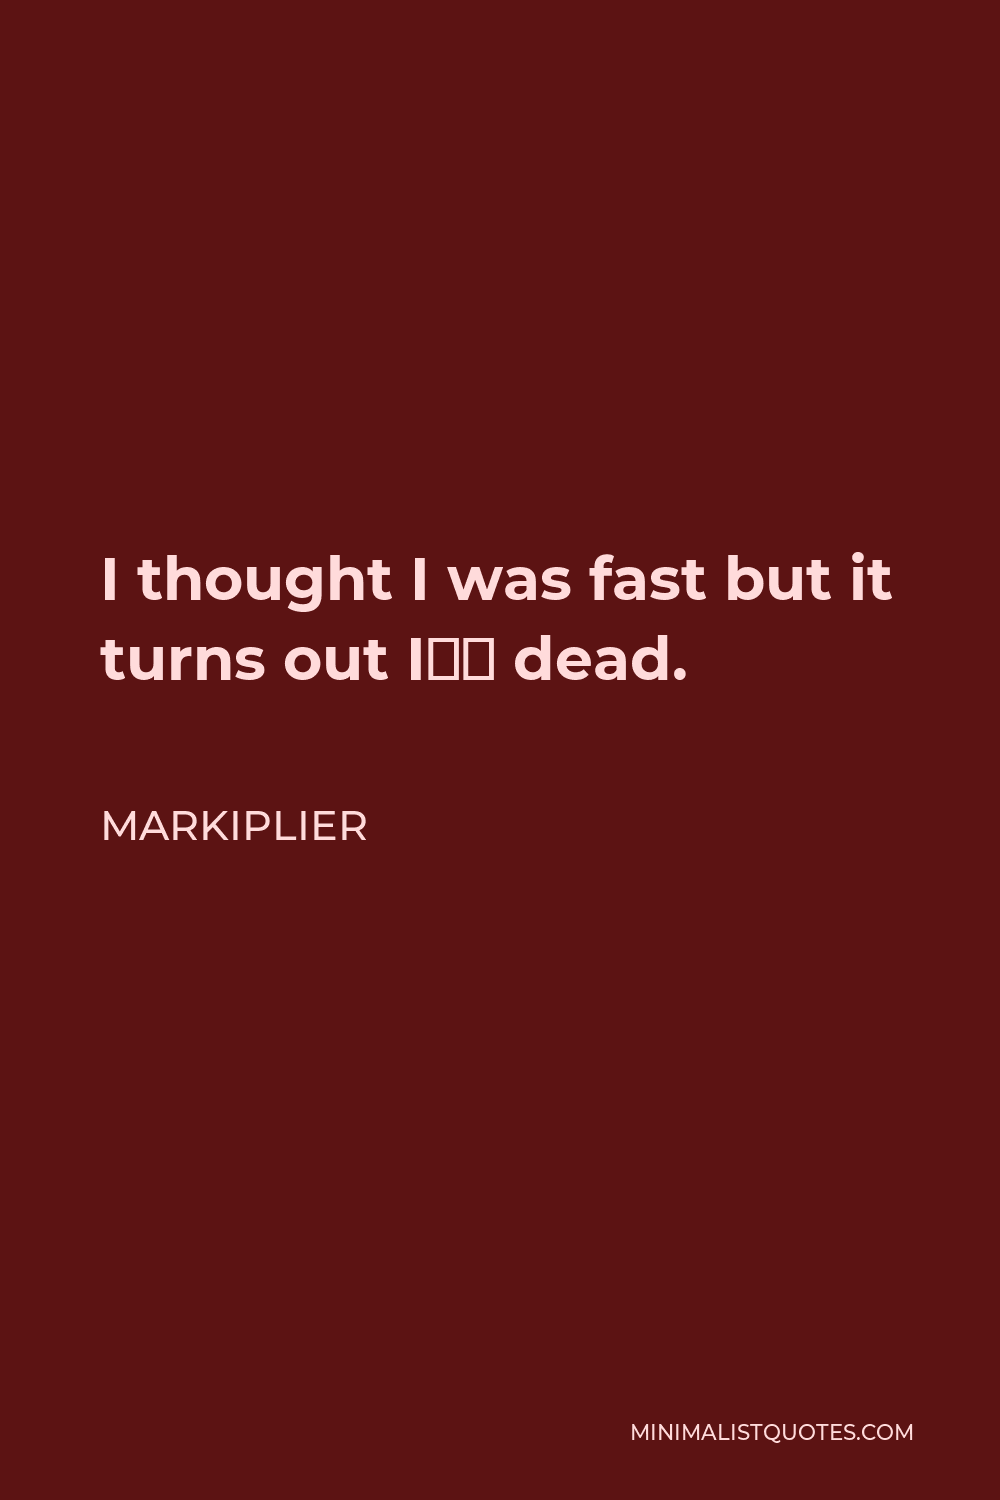 Markiplier Quote - I thought I was fast but it turns out I’m dead.